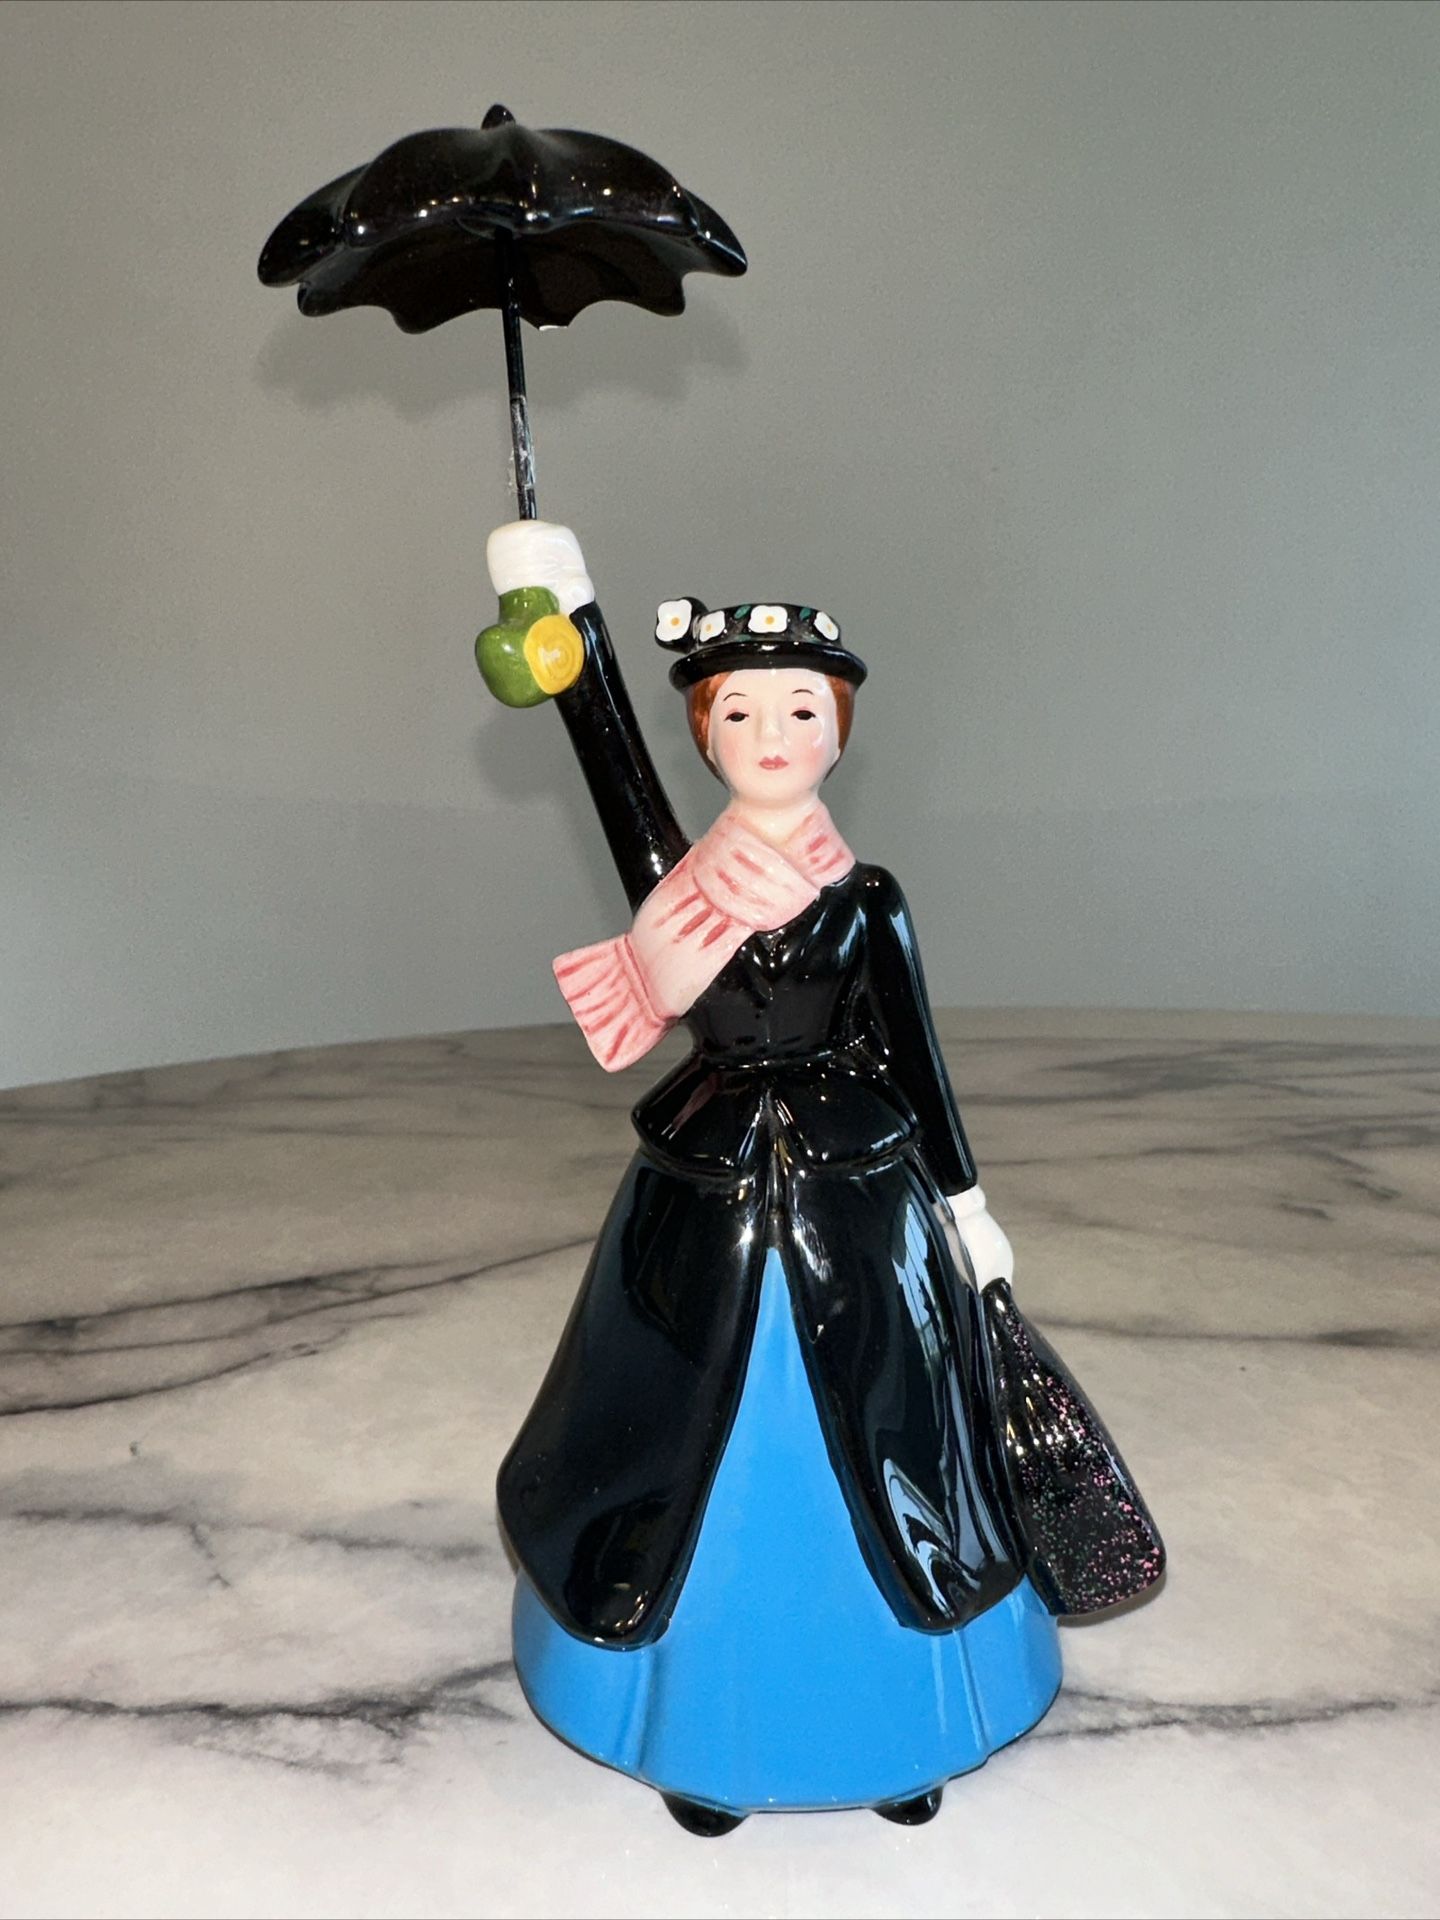  RARE Disney Store Mary Poppins Ceramic Figurine W/ Umbrella Vintage 8"    This is old. It's rare to find mary poppins Disney items these days. The um